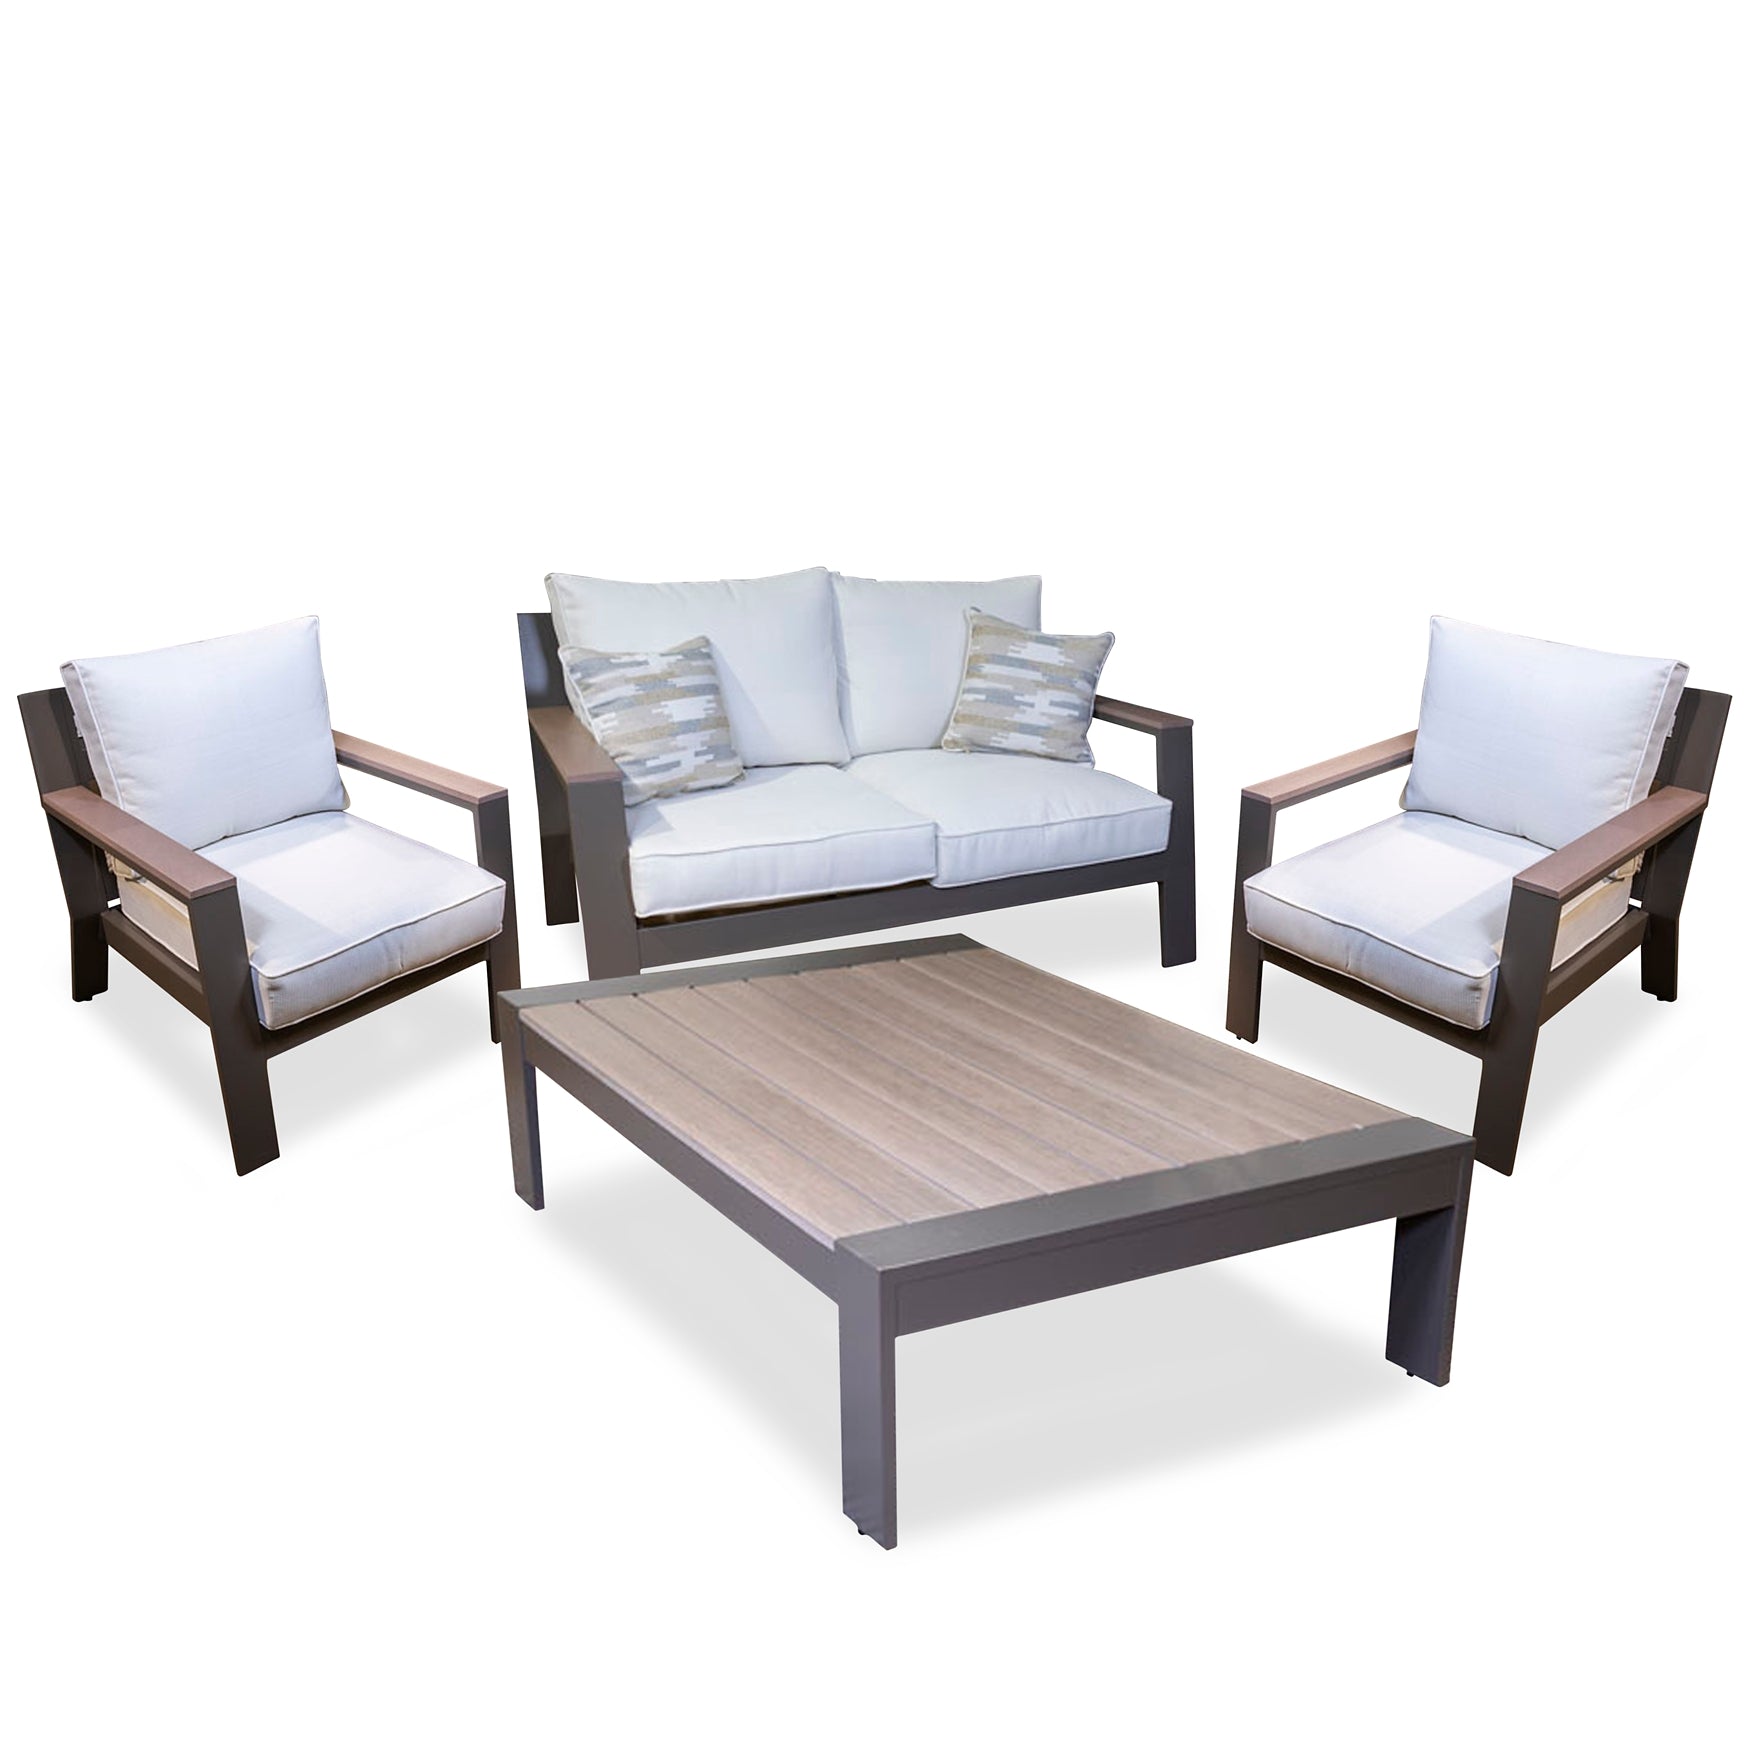 Tropicava Outdoor Loveseat and 2 Chairs with Coffee Table